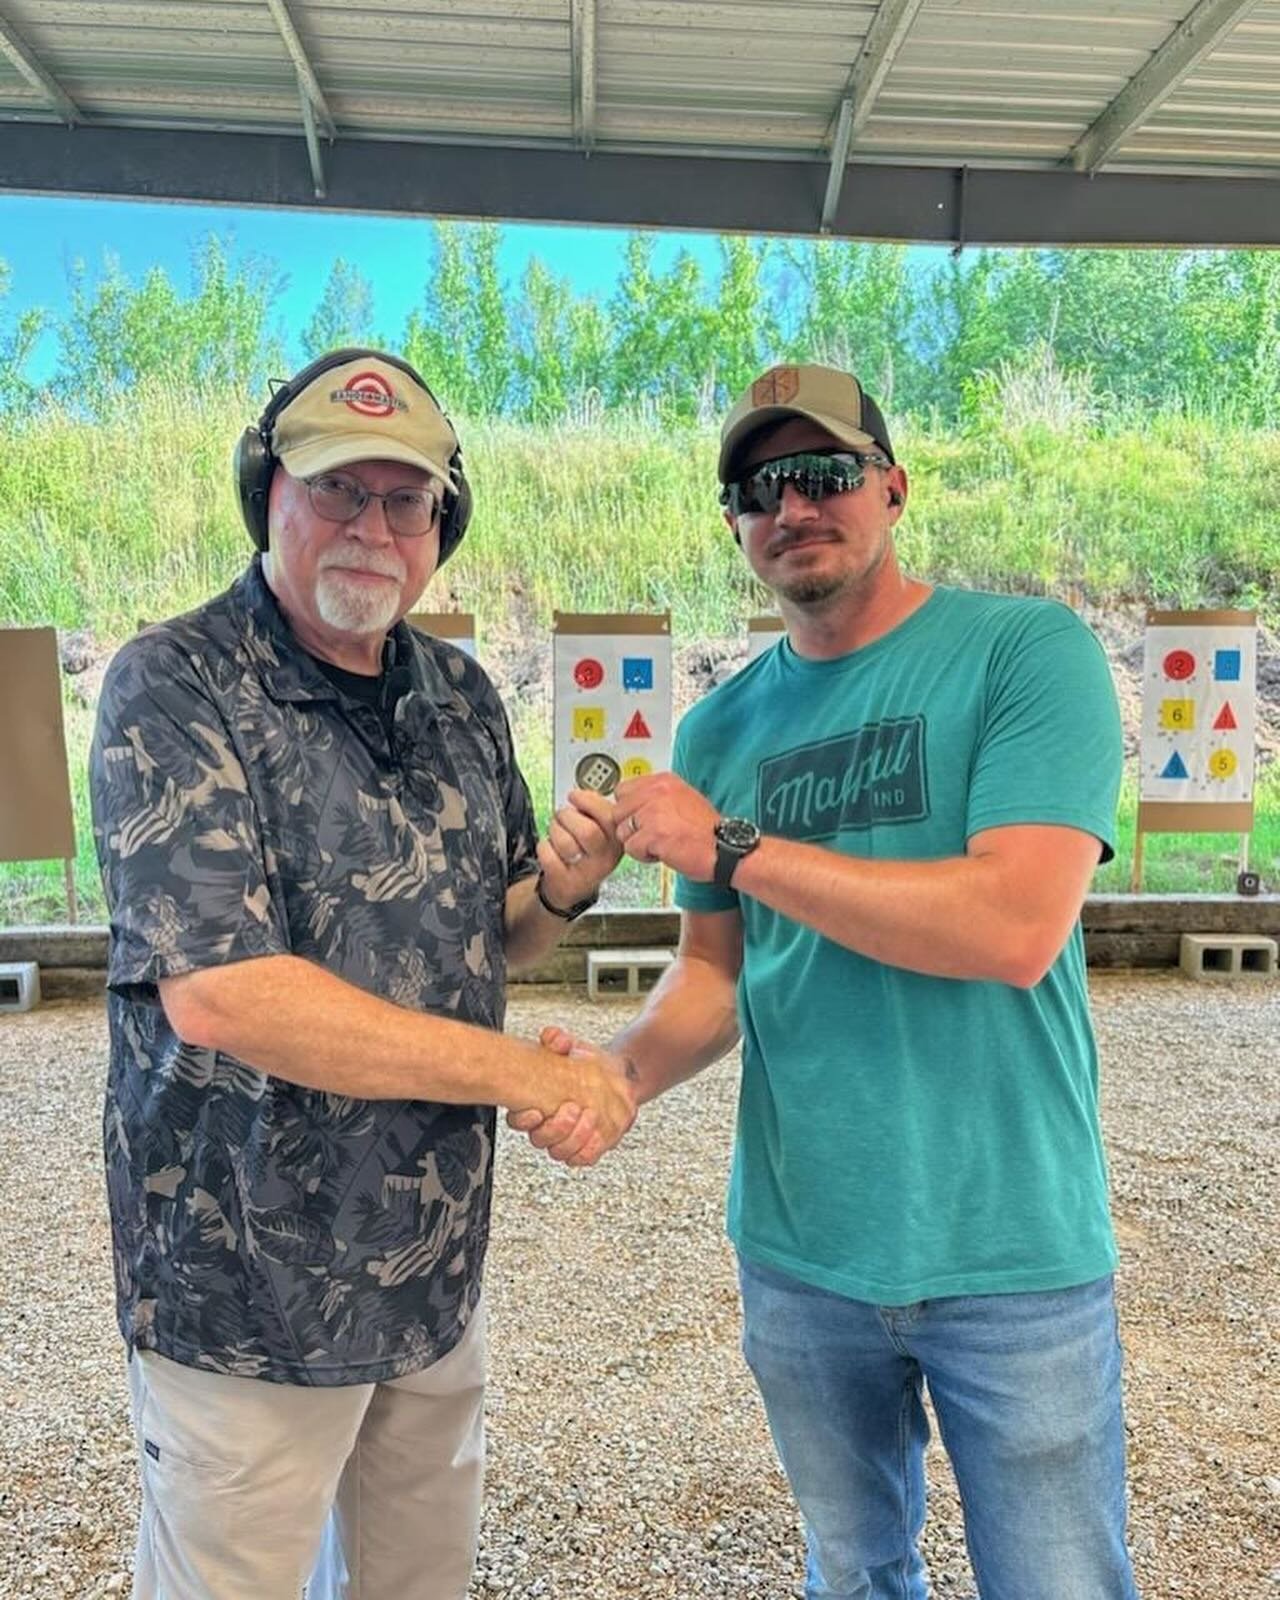 Day 2 of Tom Givens @rangemasterllc  Range Master Instructor Development Course with GreenOps instructors @mcguire_thewayforward and @jaq_thepewpewplumbrtx . Kudos and Congrats to @mcguire_thewayforward for earning Top Shot for Bullseye drill, Baseli